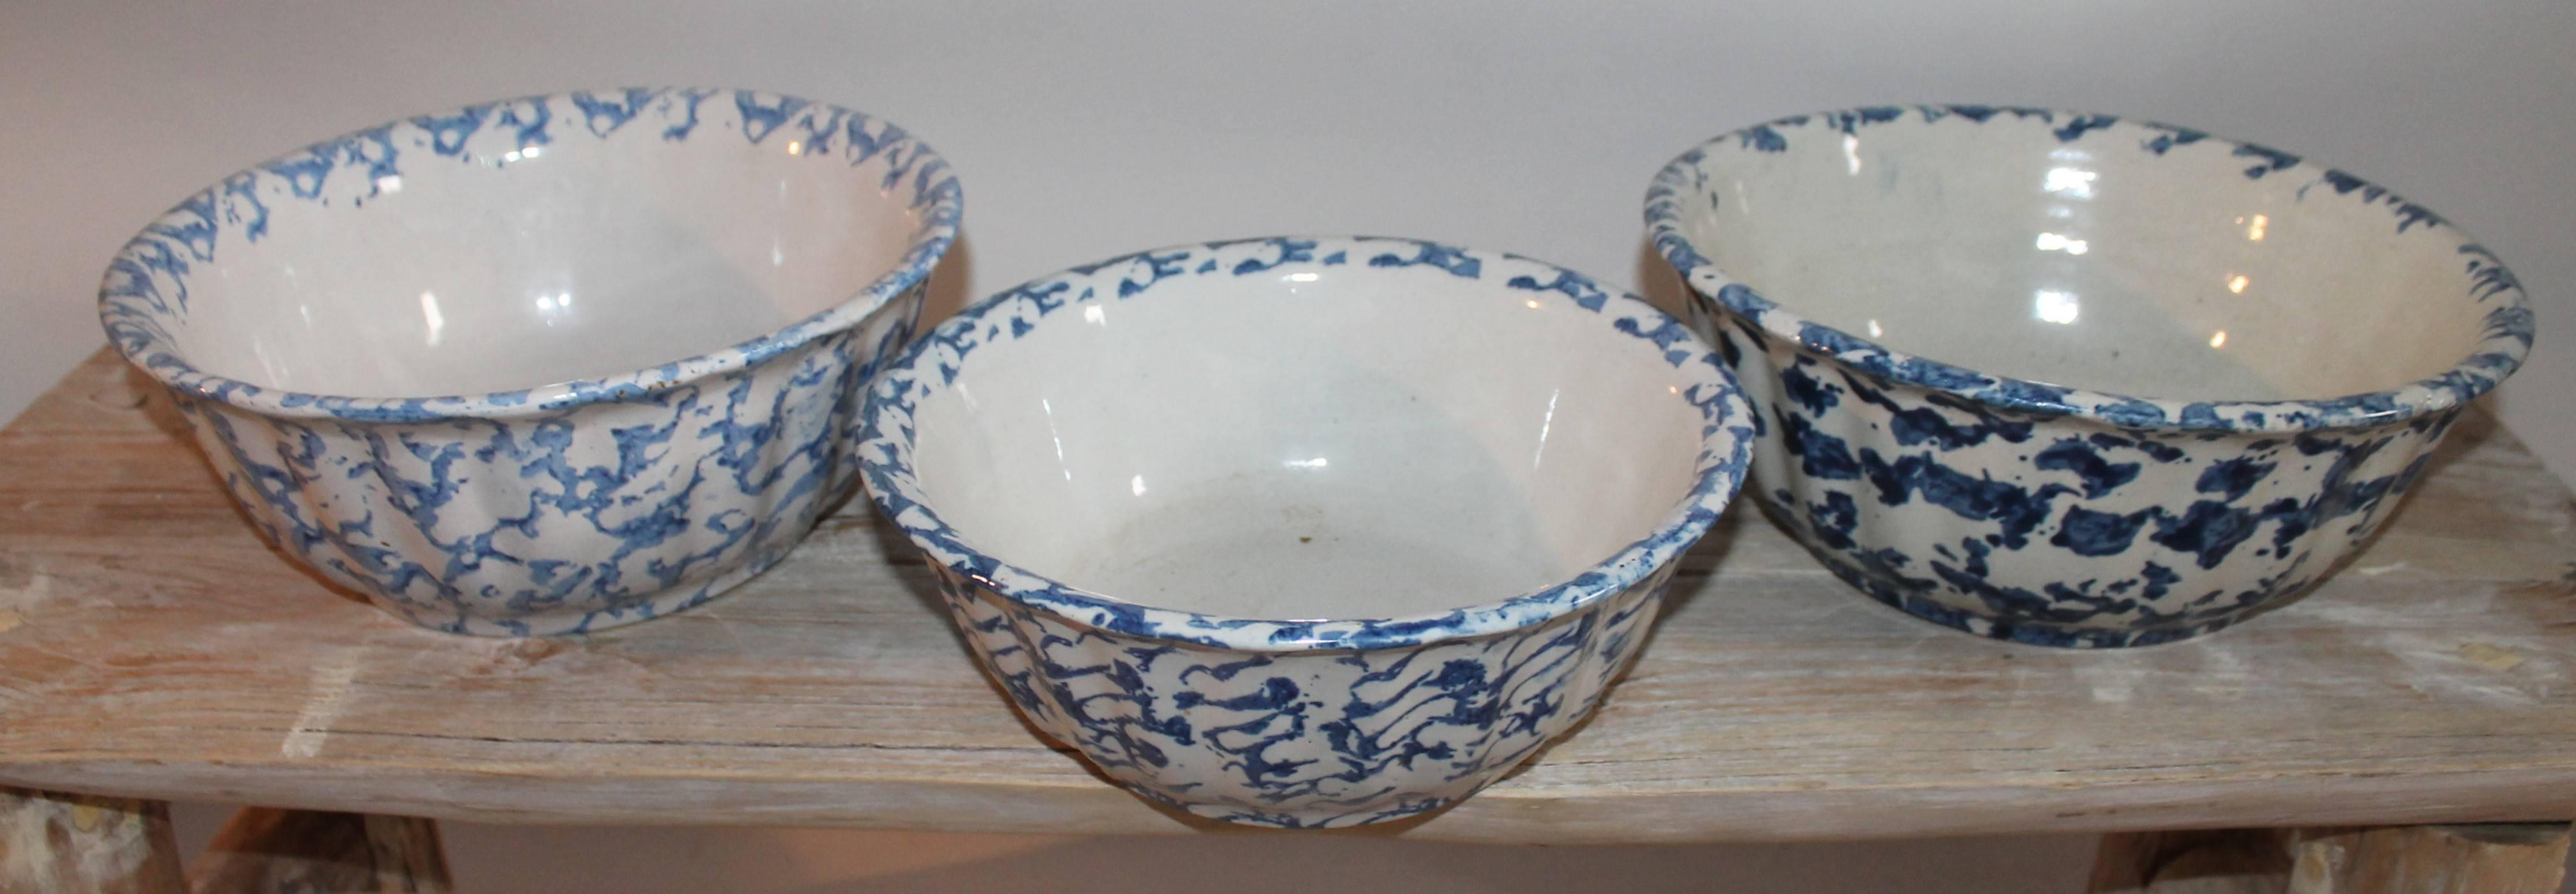 Other Three 19th Century Sponge Ware Pottery Scalloped Bowls For Sale